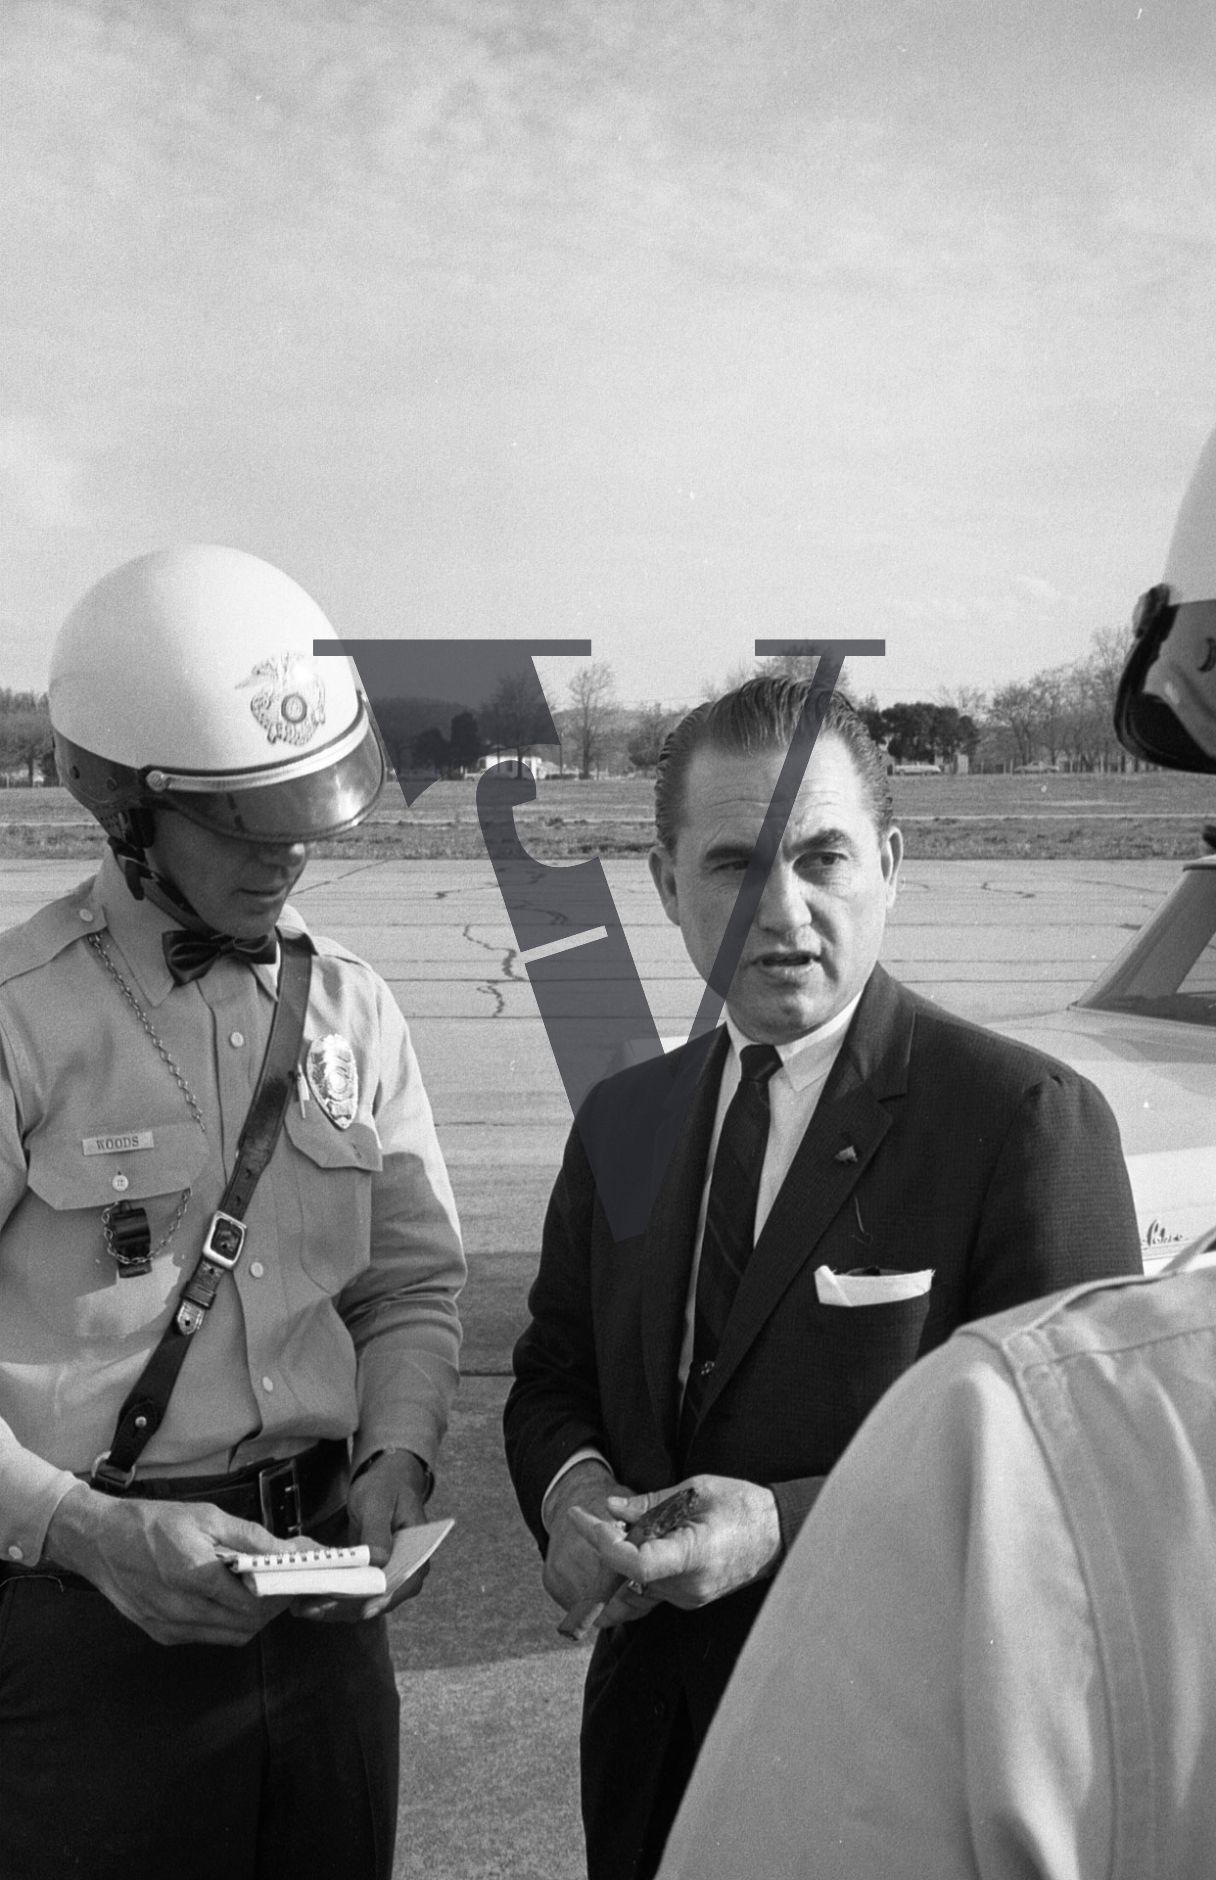 Governor George Wallace, with police, cigar.